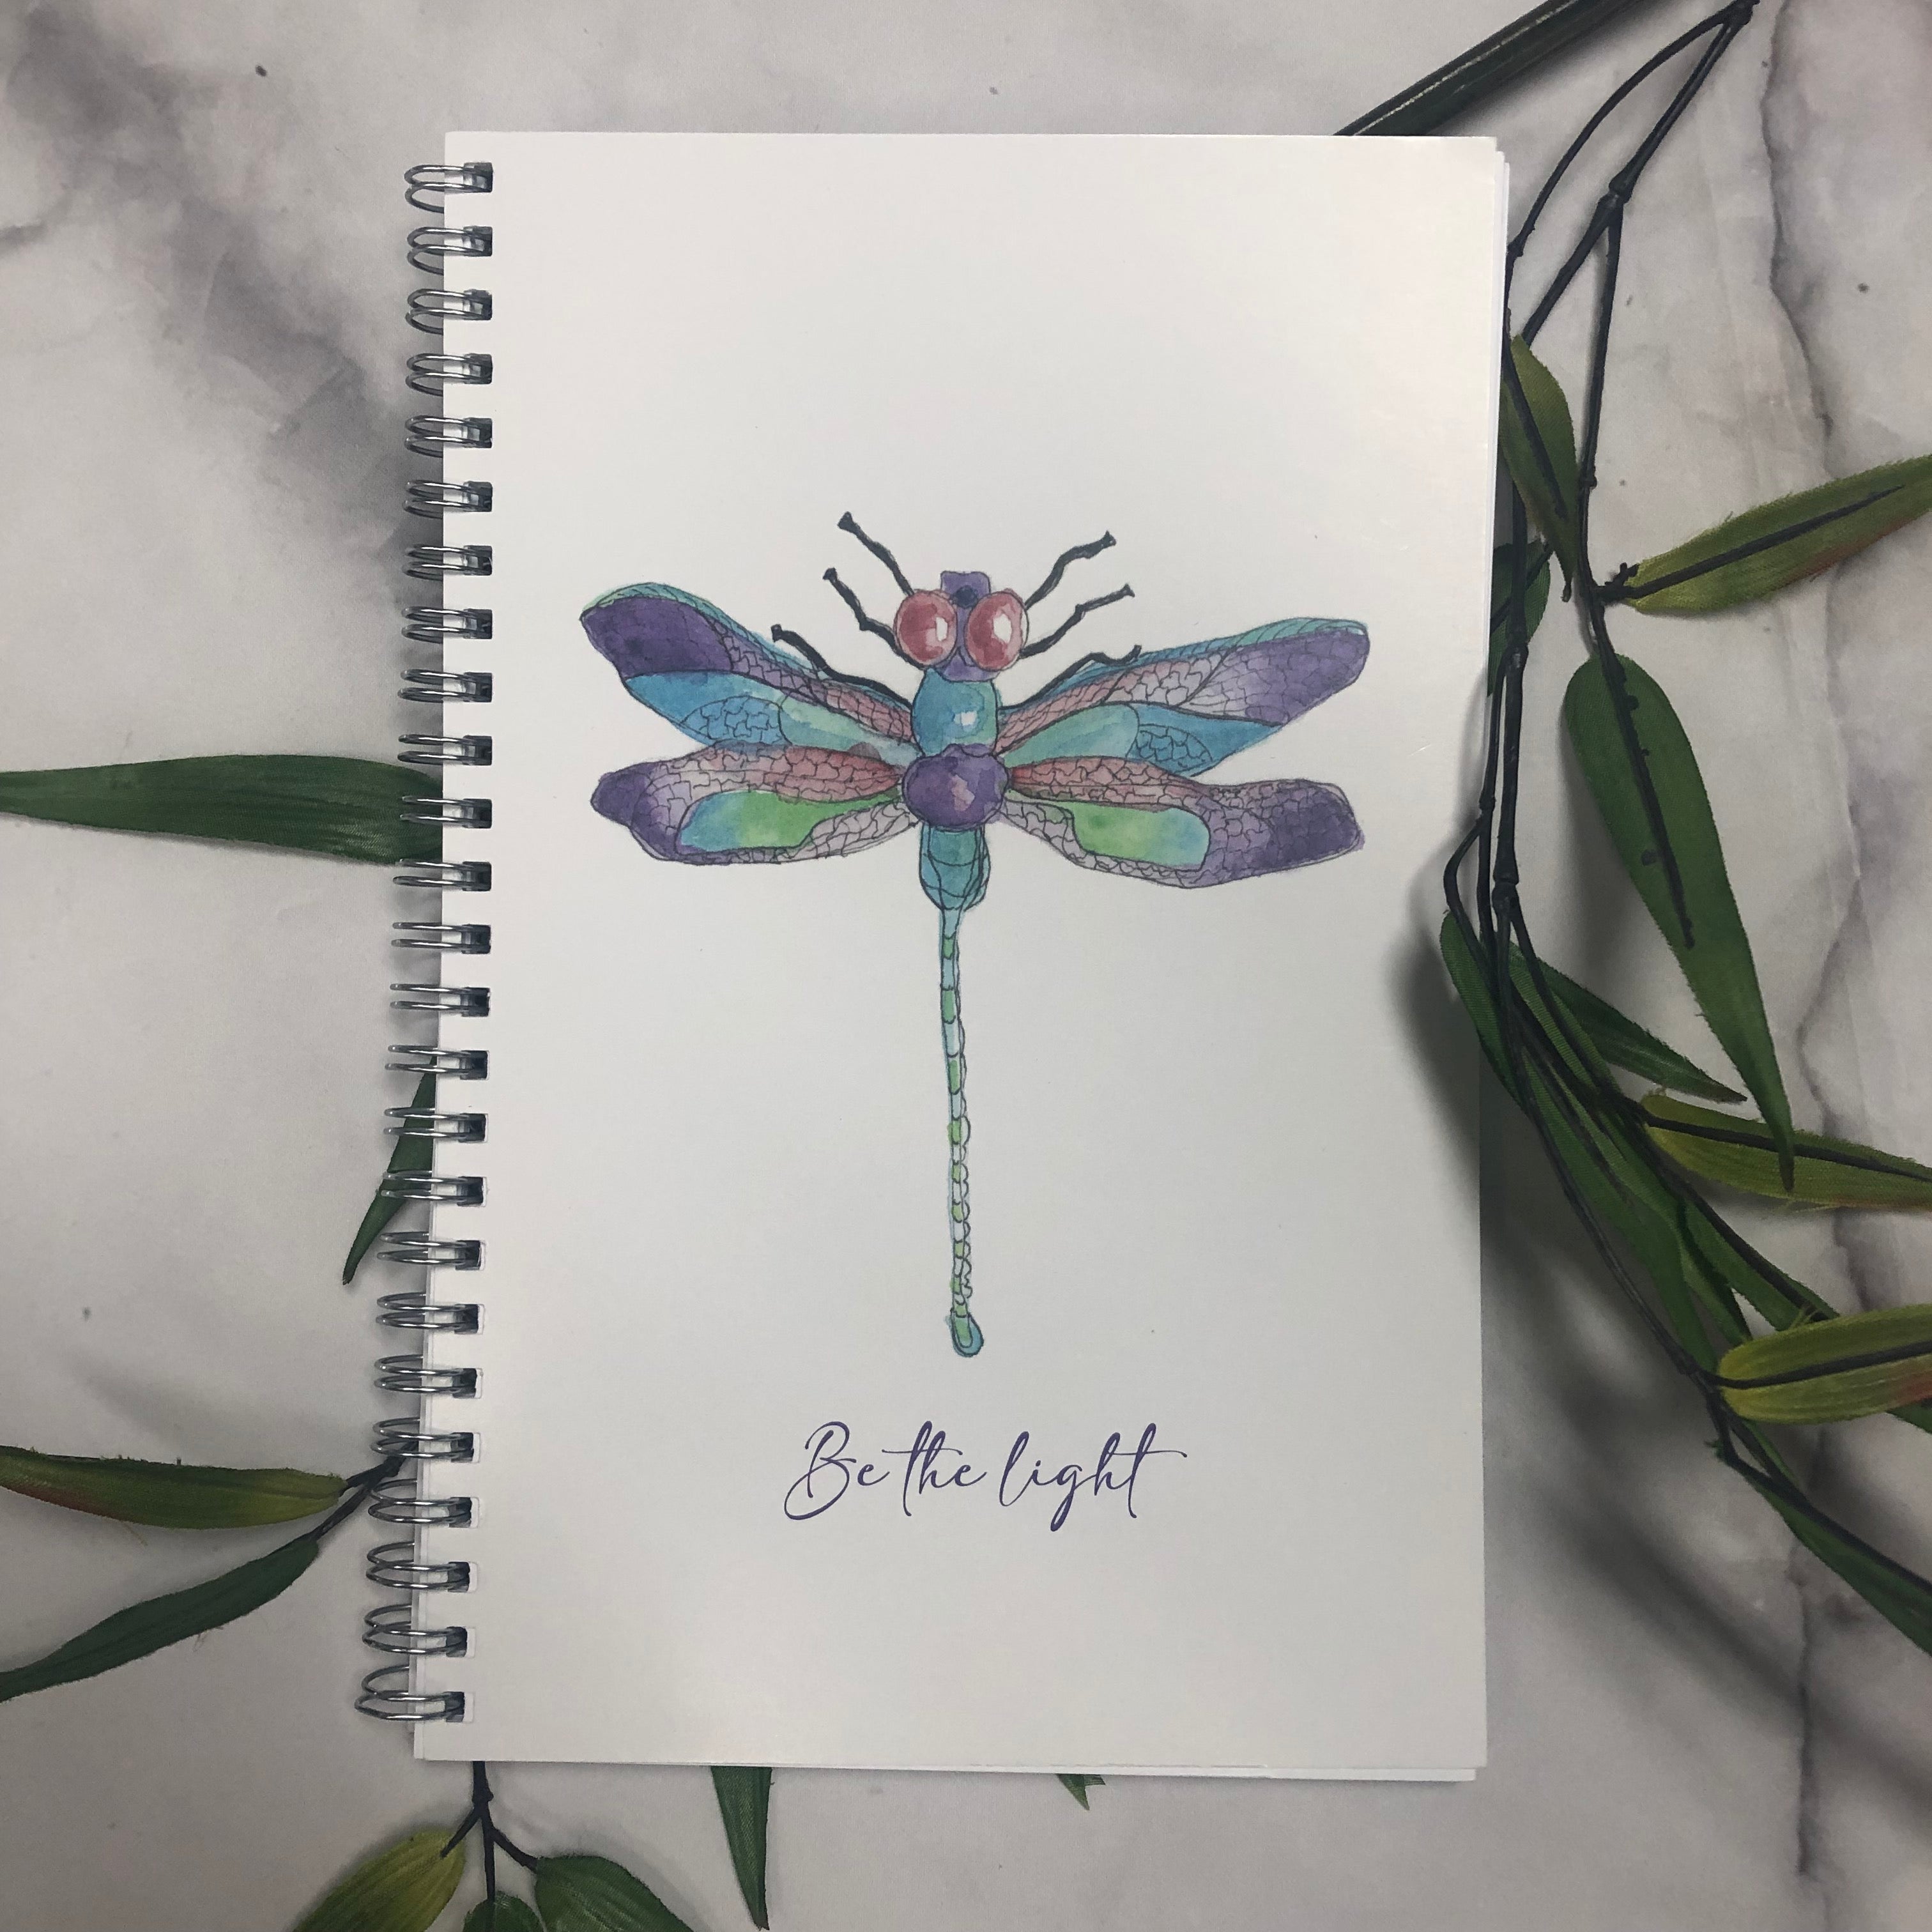 "Dragonfly" Journal